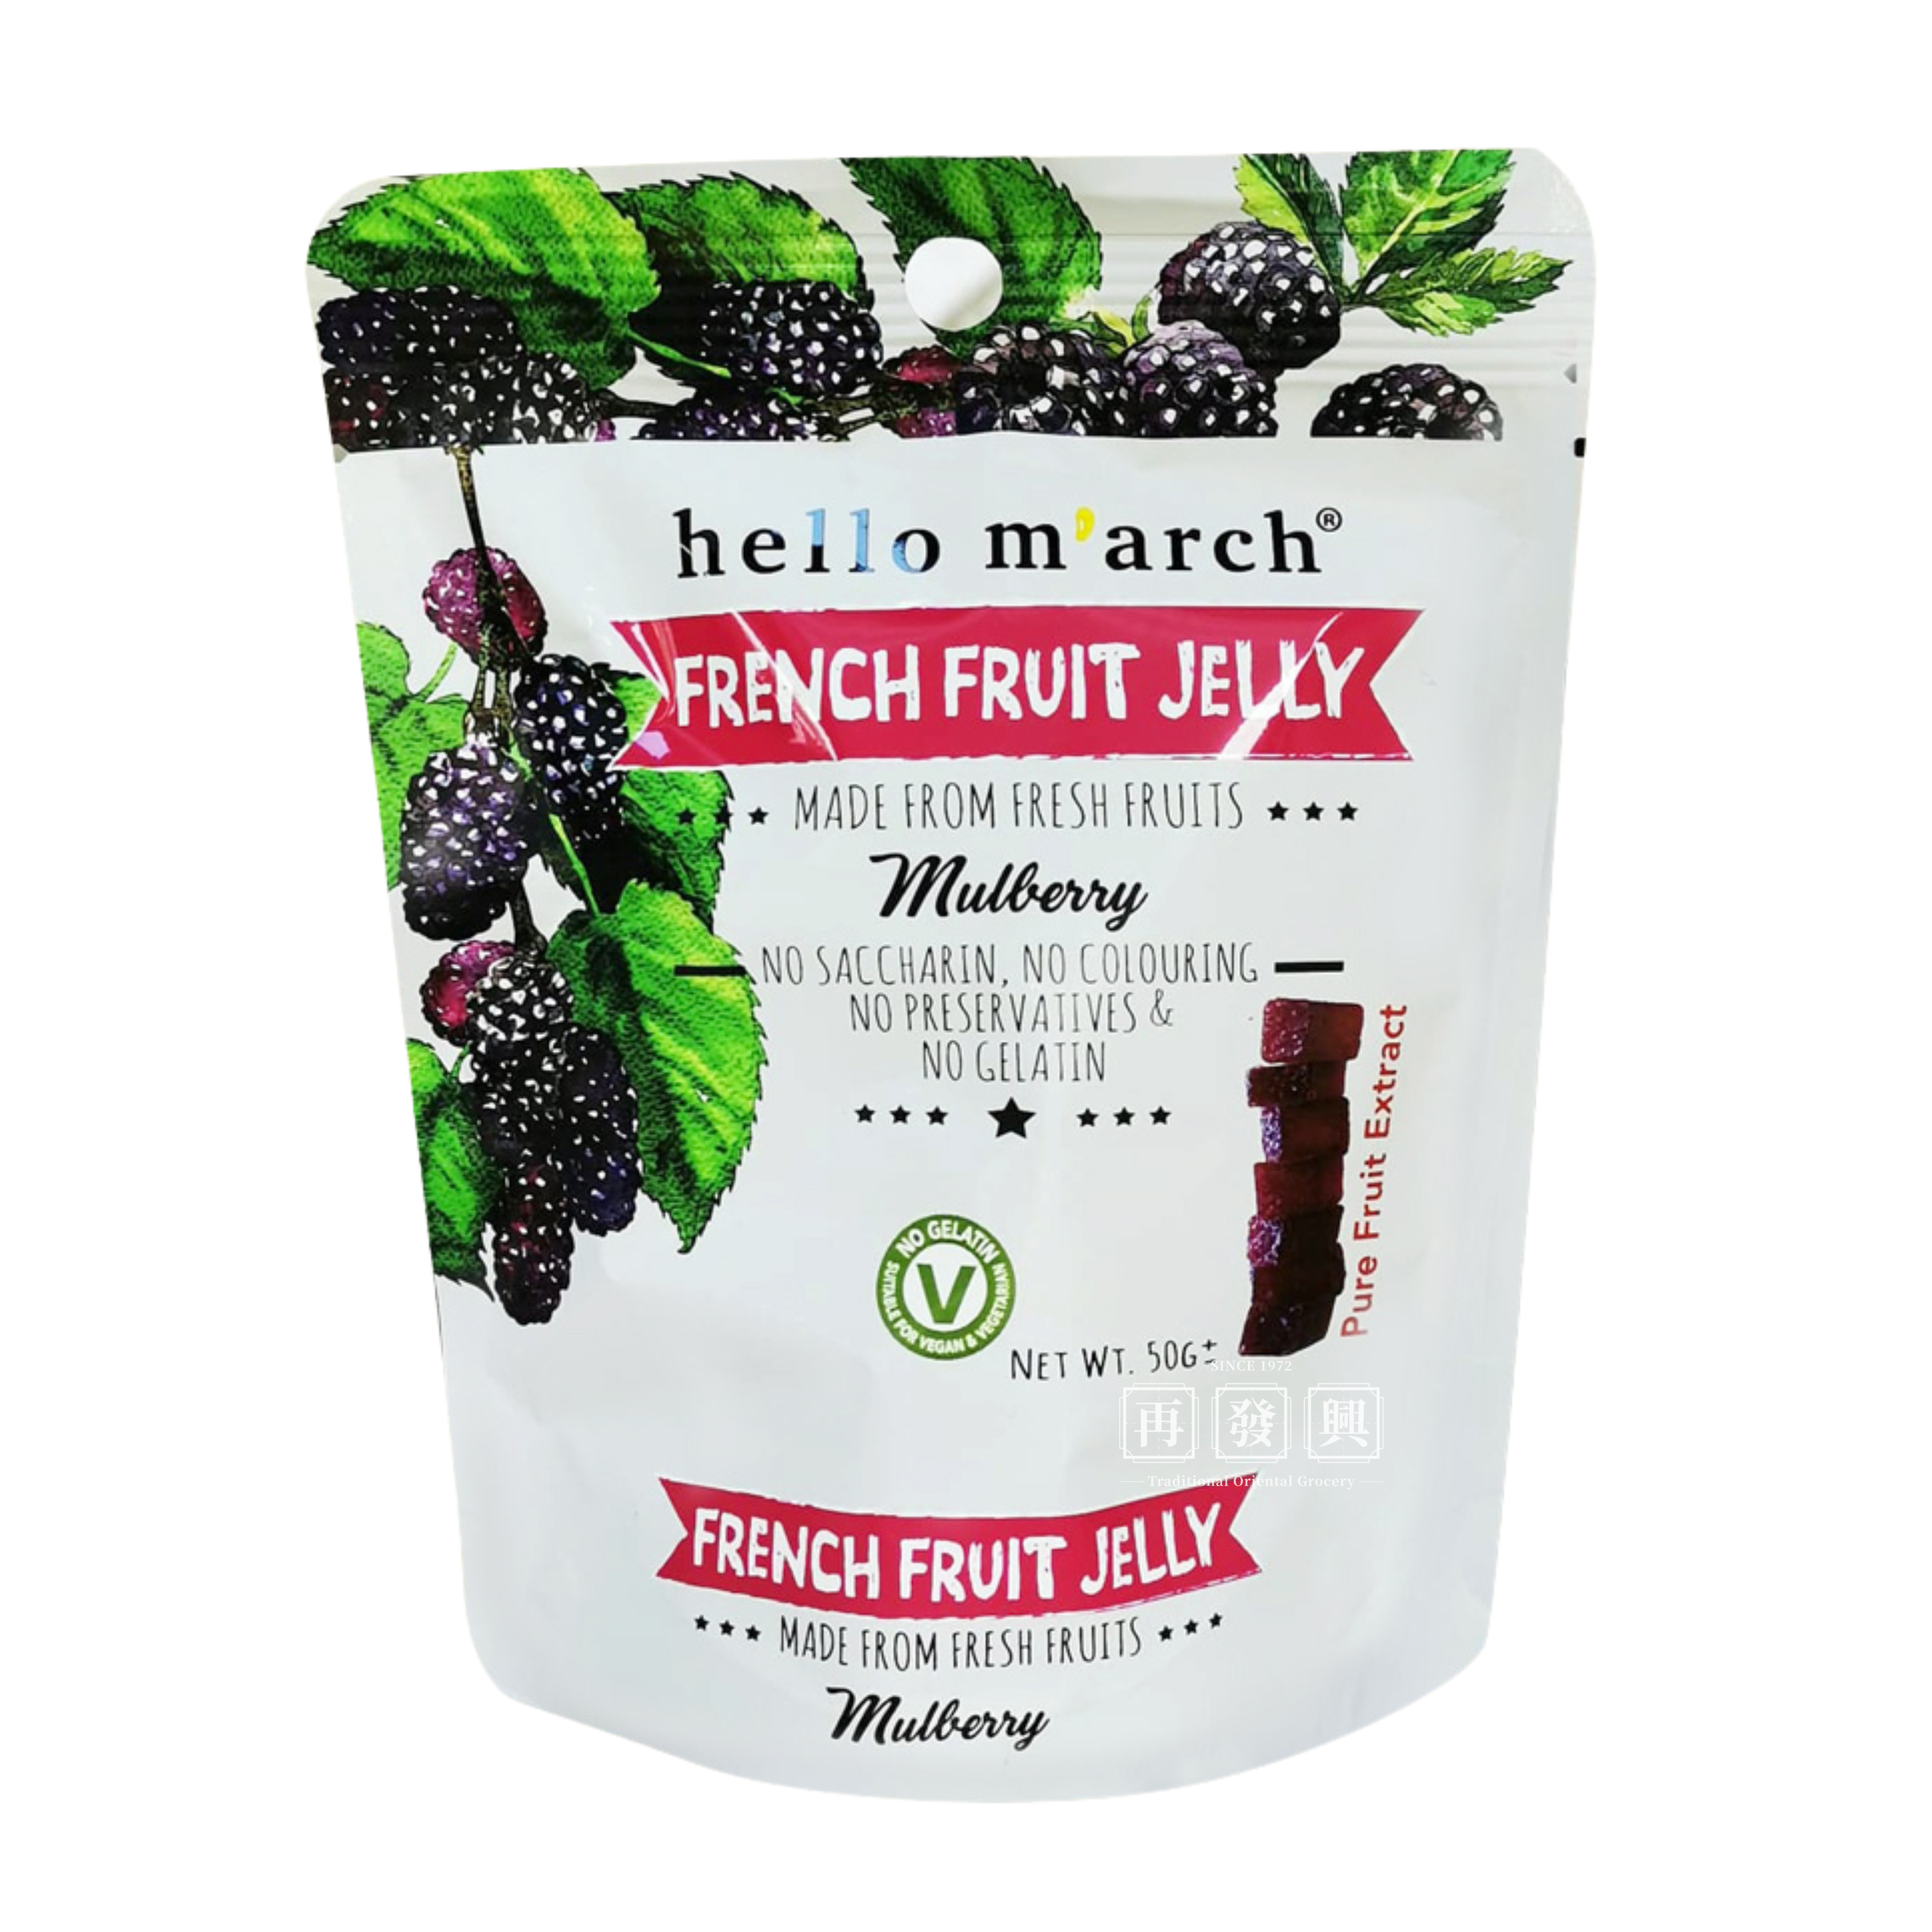 Hello M'arch French Fruit Jelly - Mulberry 法式果冻(桑莓) 50g